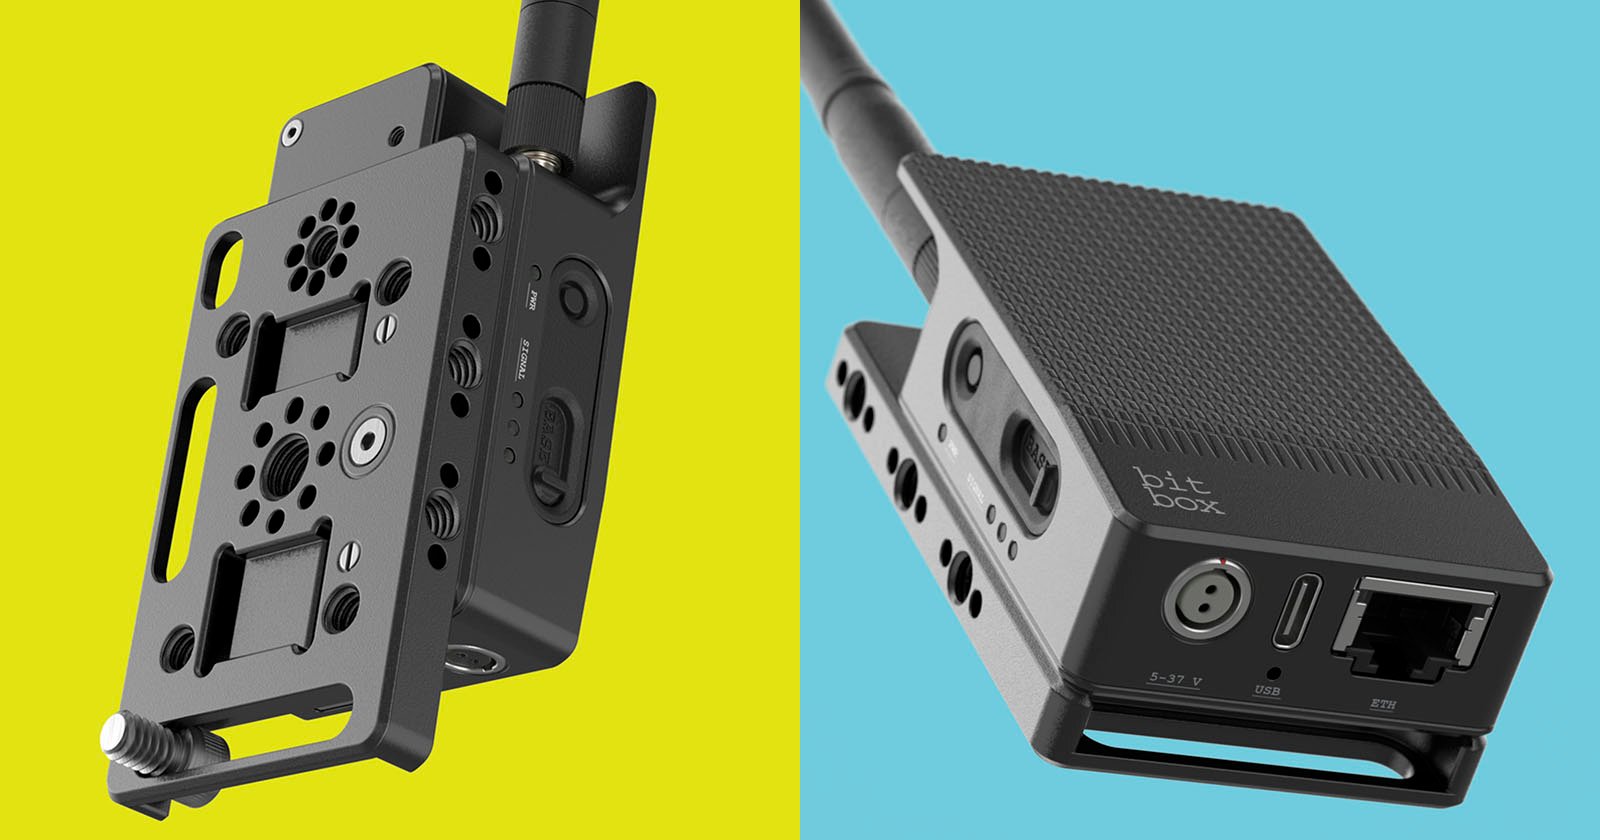 Bit Part Announces Bitbox: A Remote Camera Control That Can Do It All